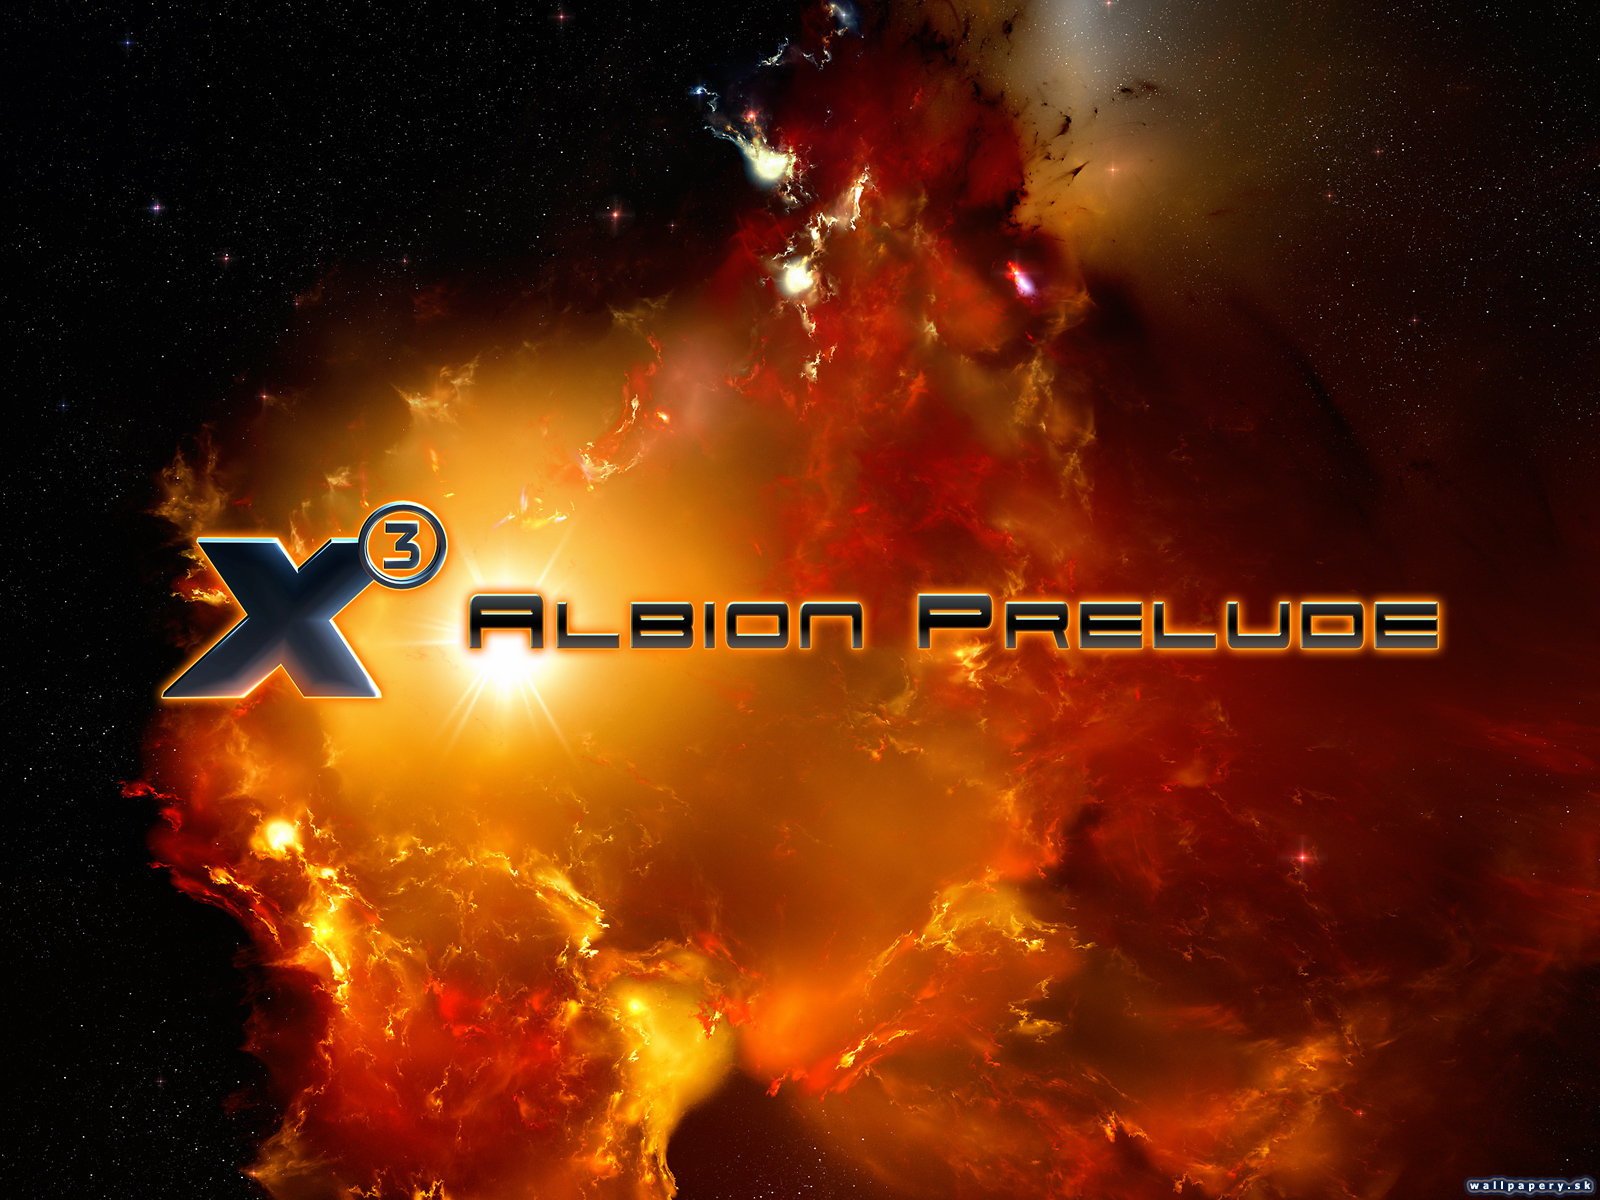 X3 Albion Prelude Patch 3.1